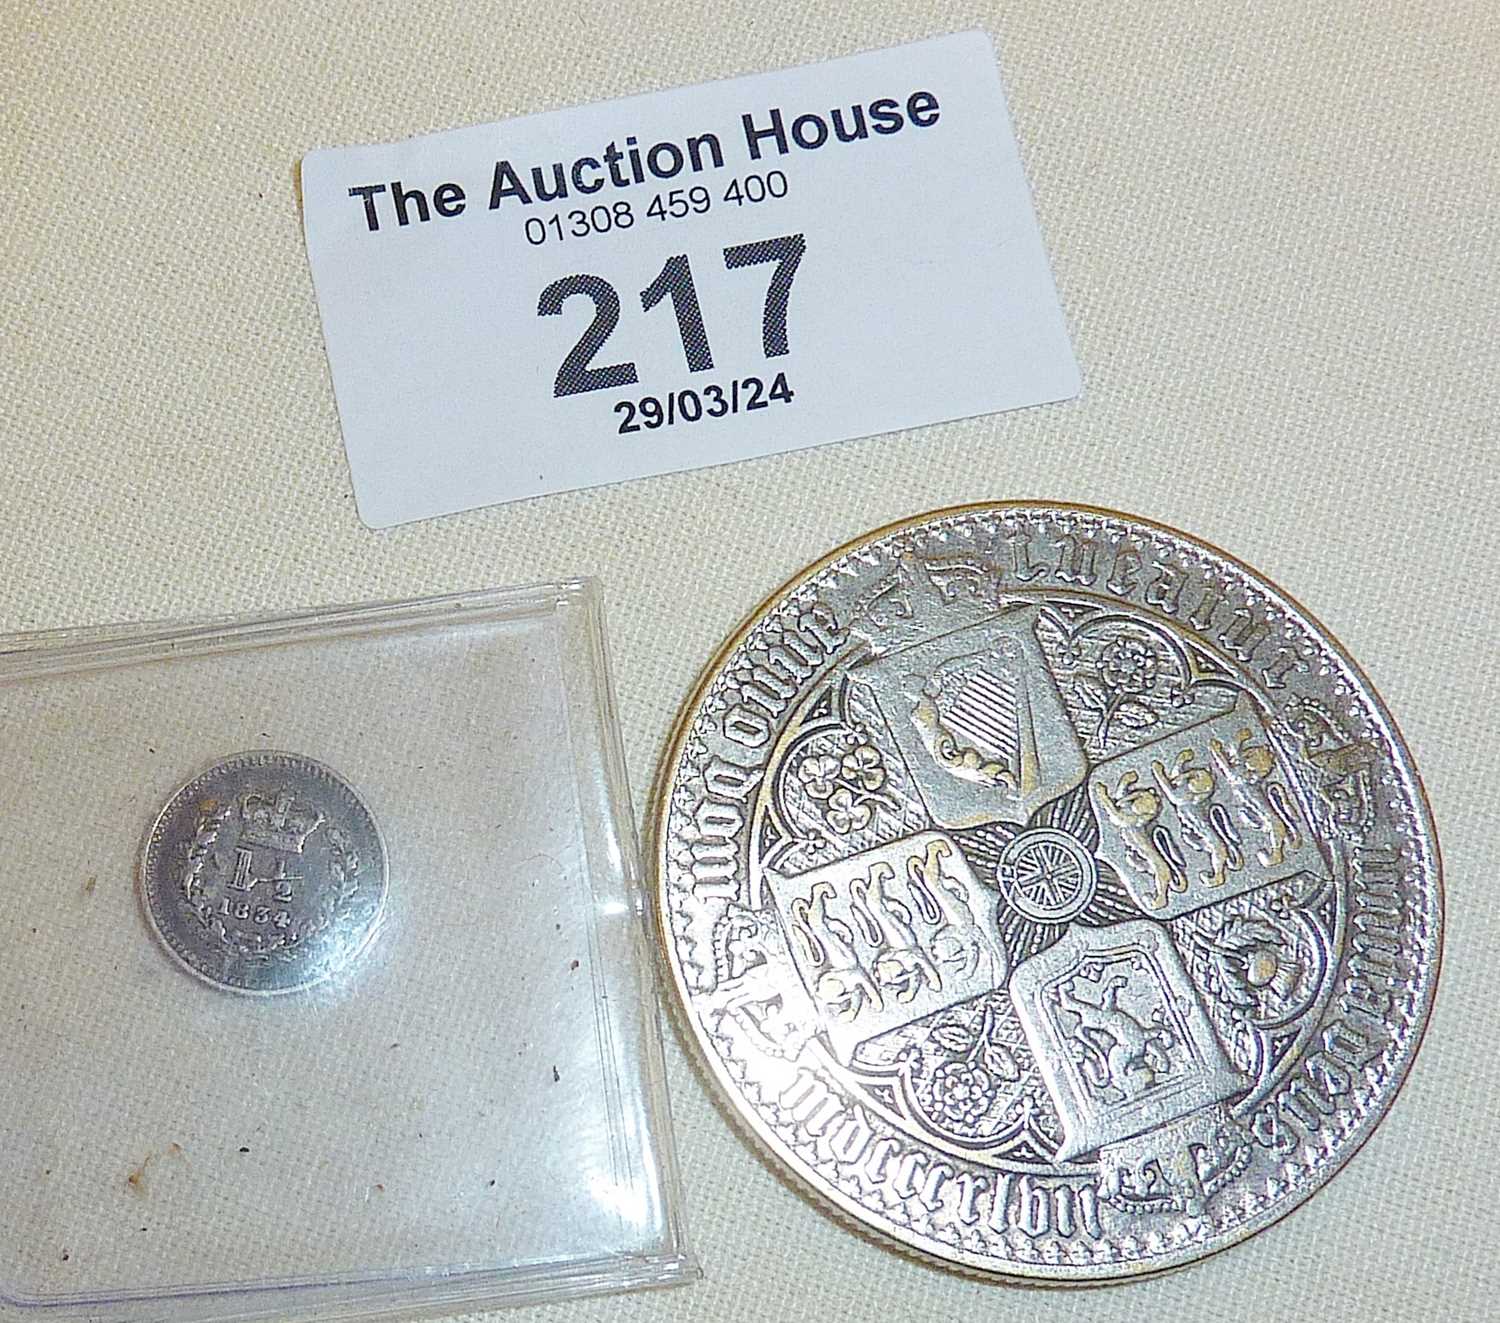 William IV 1834 one and half pence silver coin, and a Queen Victoria crown - Image 2 of 2